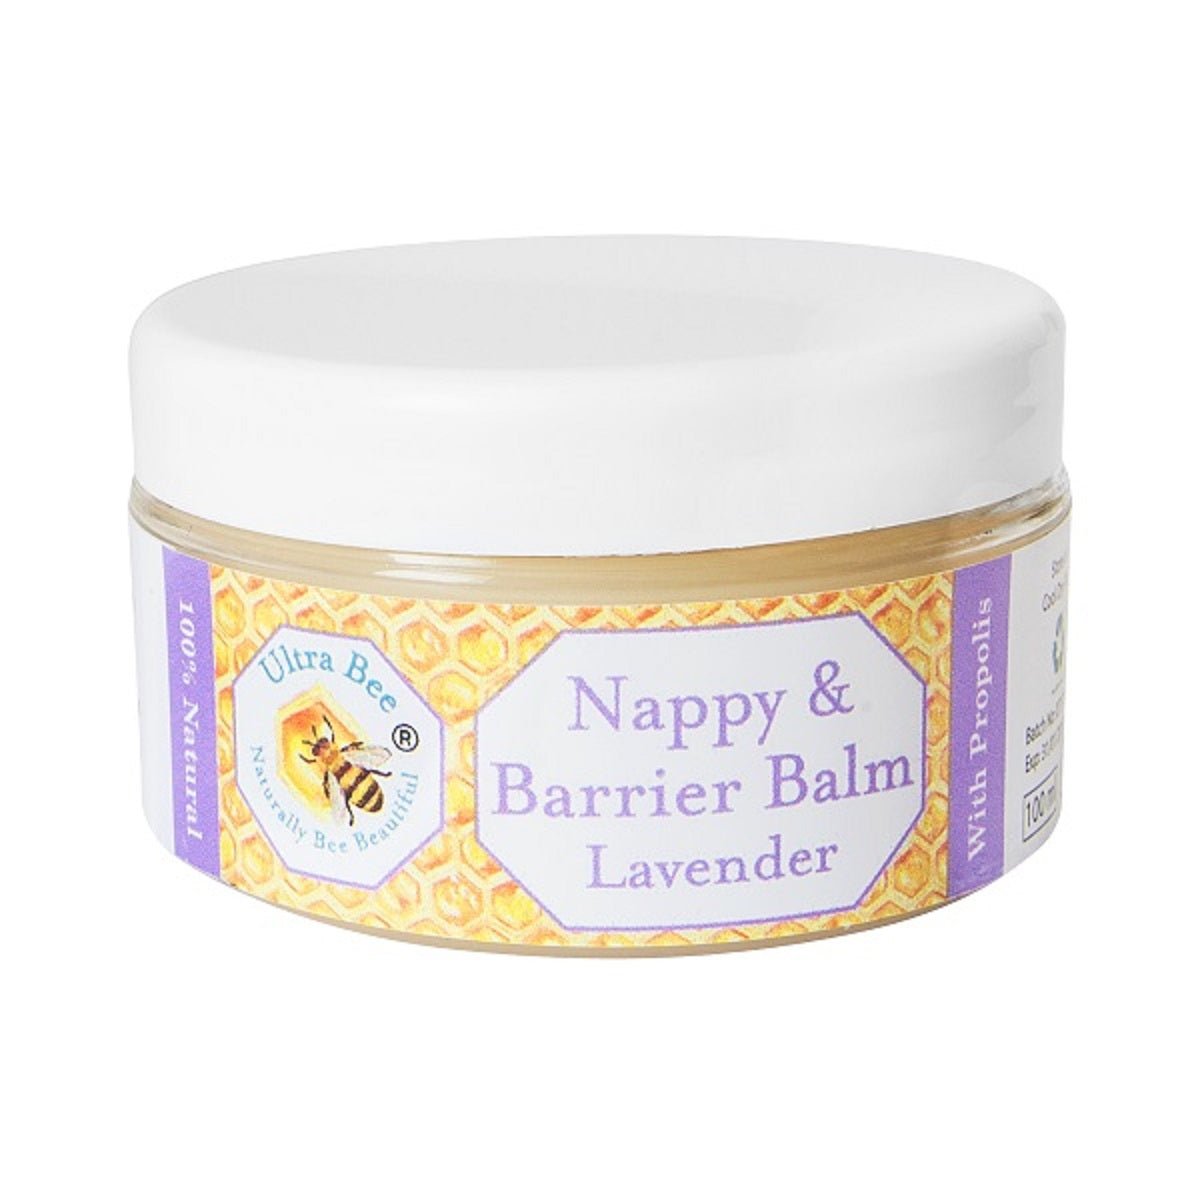 100% Natural Nappy & Barrier Balm Lavender 100ml - Ultrabee